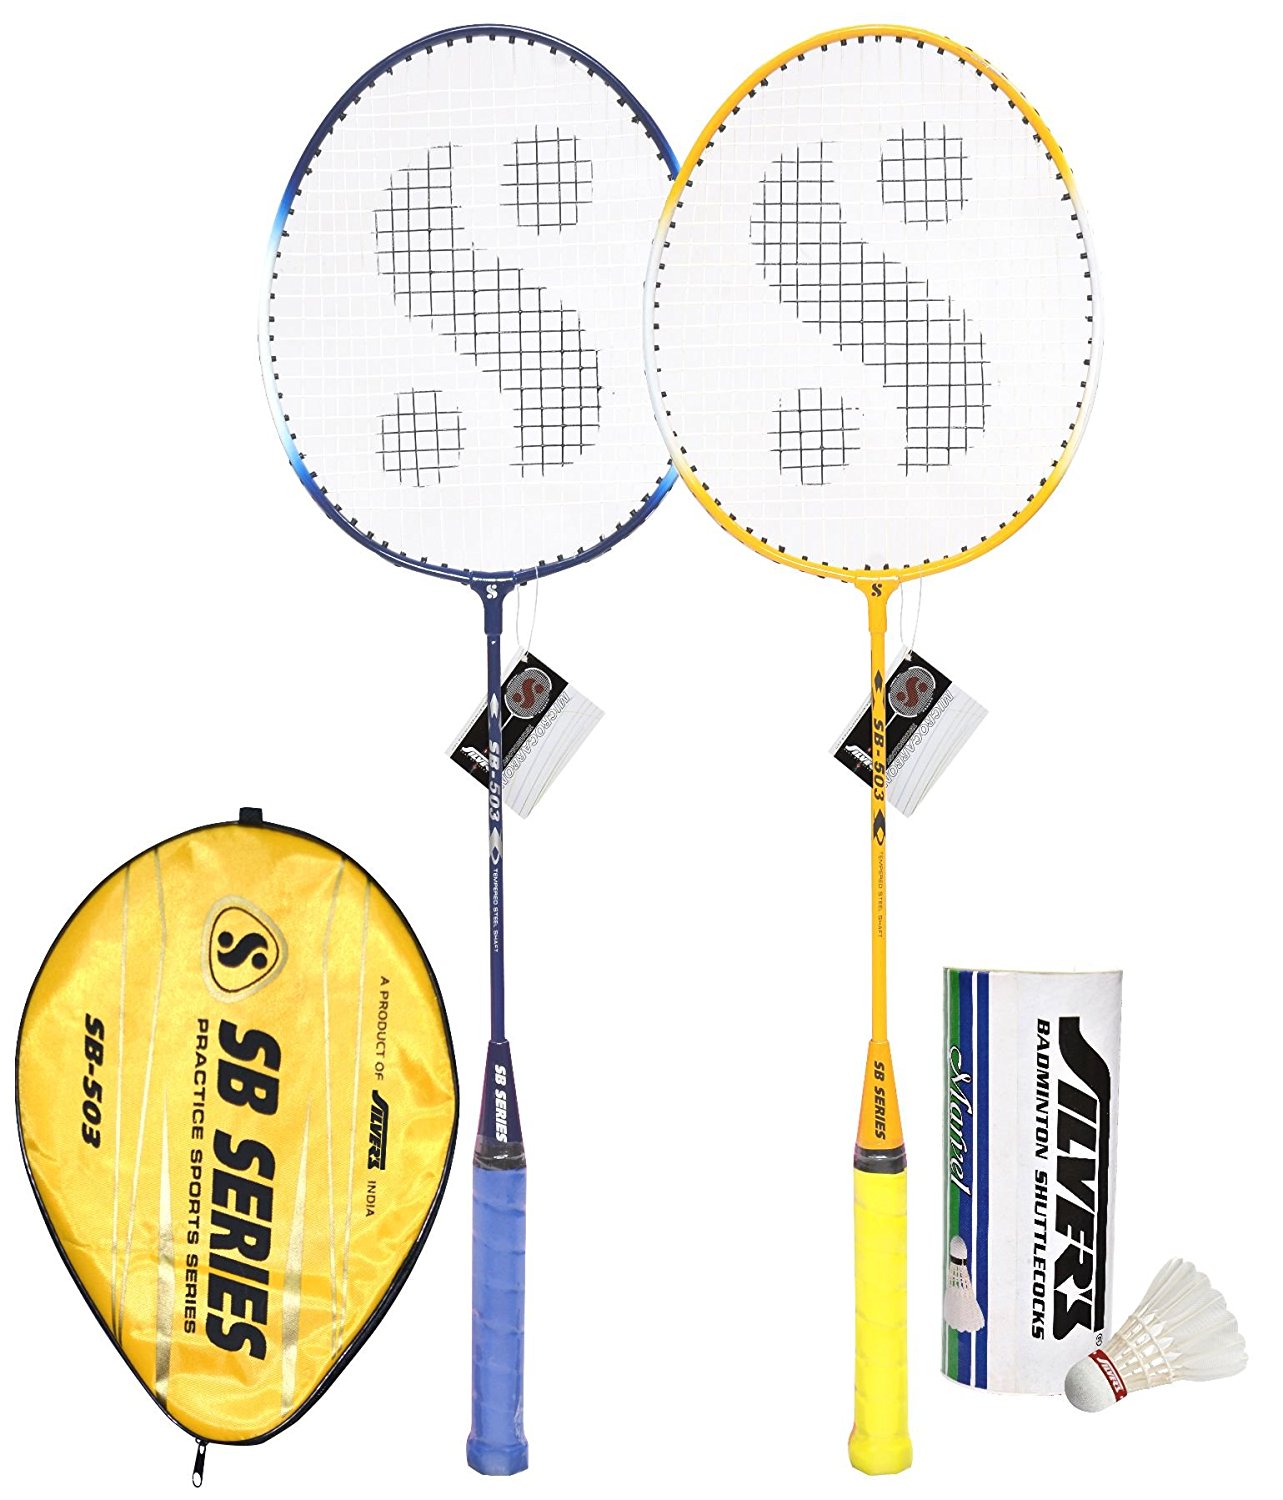 Amazon: Silver’s SB 503 Badminton Racquet Combo At Rs.339 Only